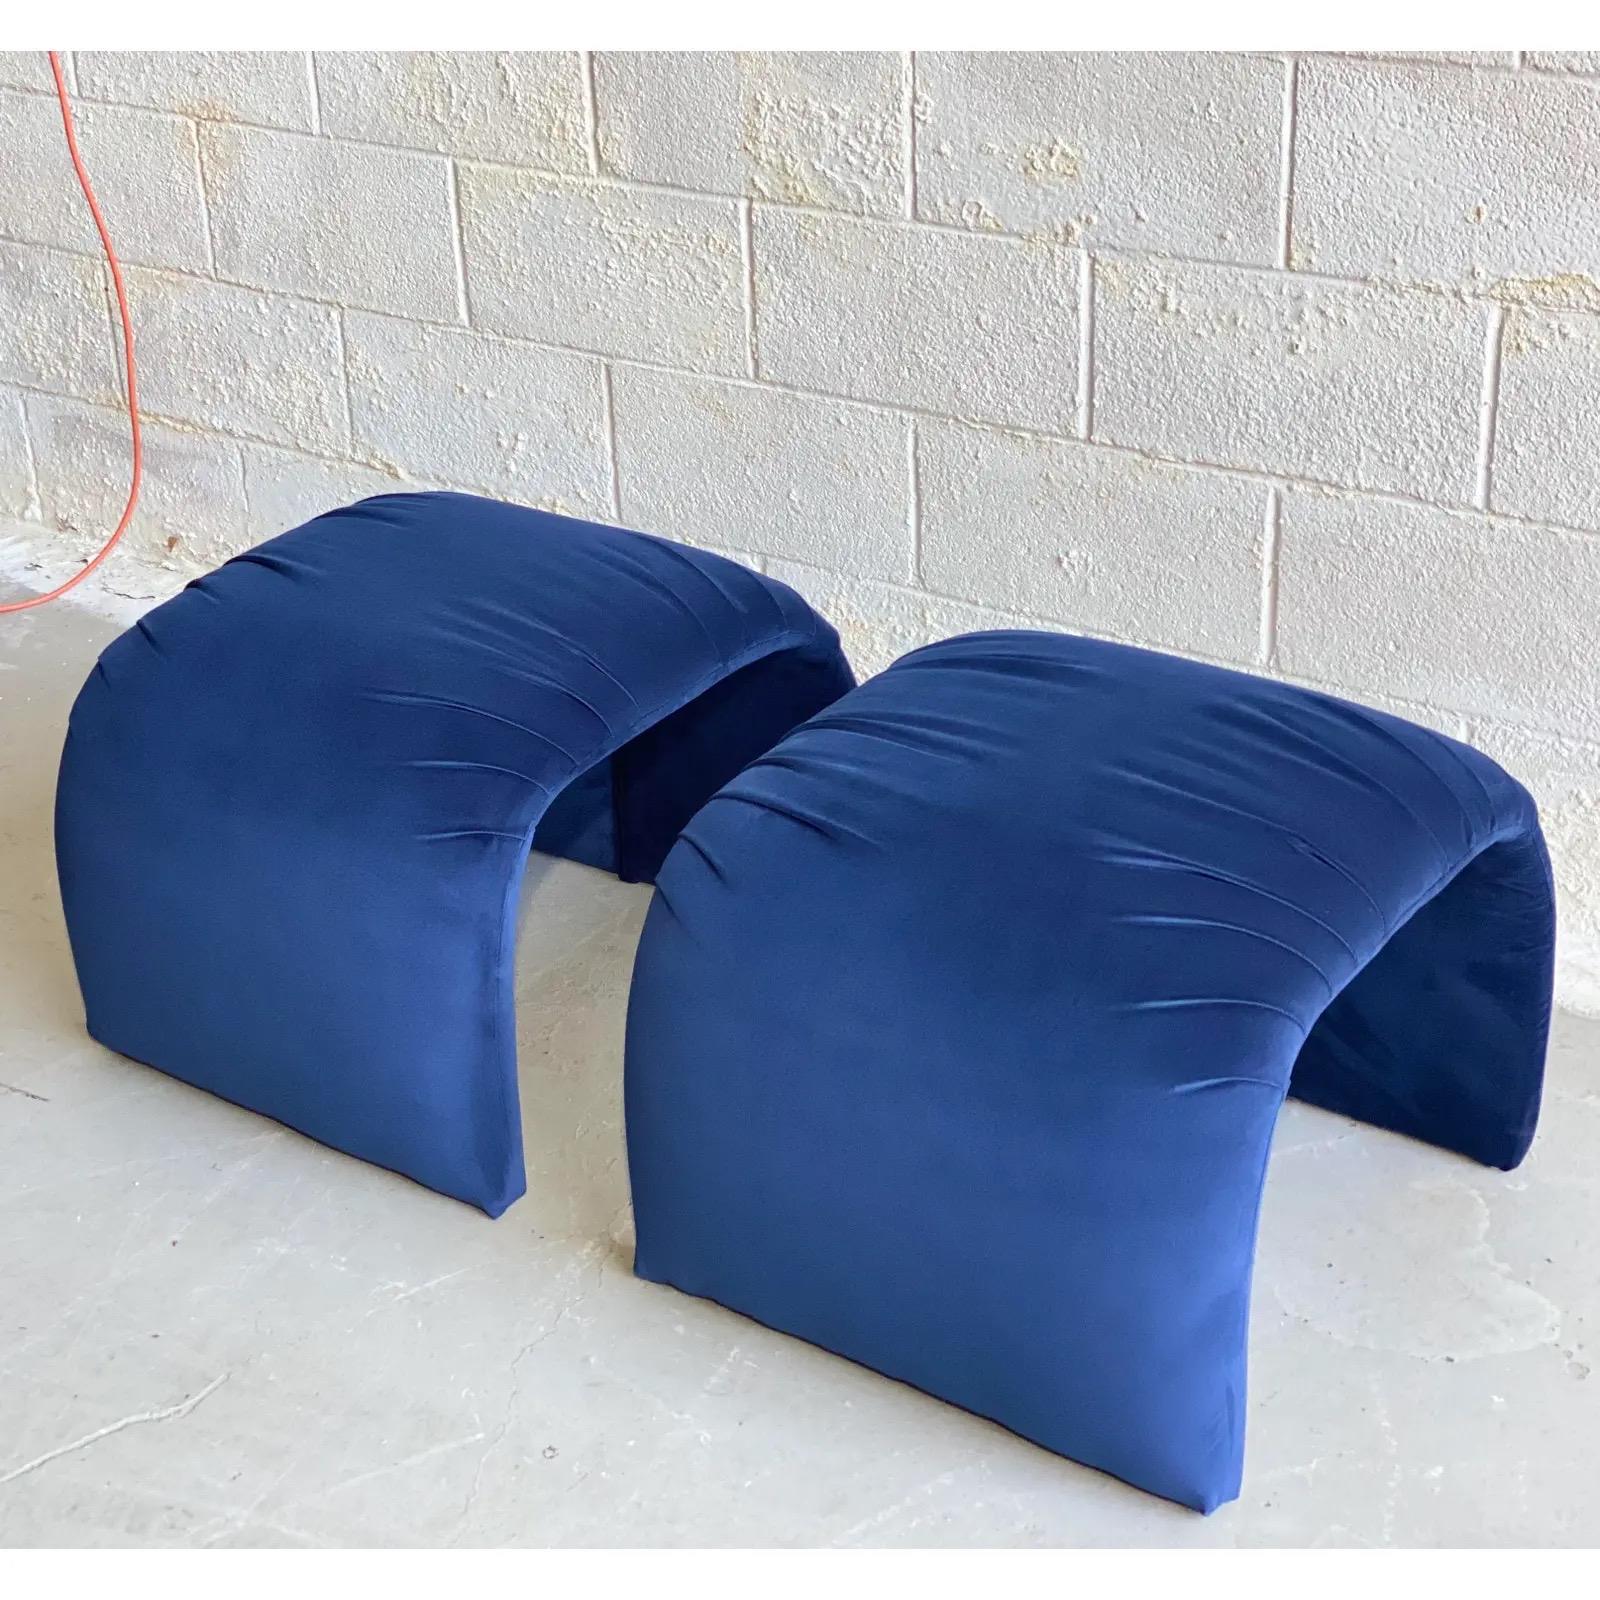 1980s Vintage Waterfall Blue Upholstered Ottomans, a Pair For Sale 1